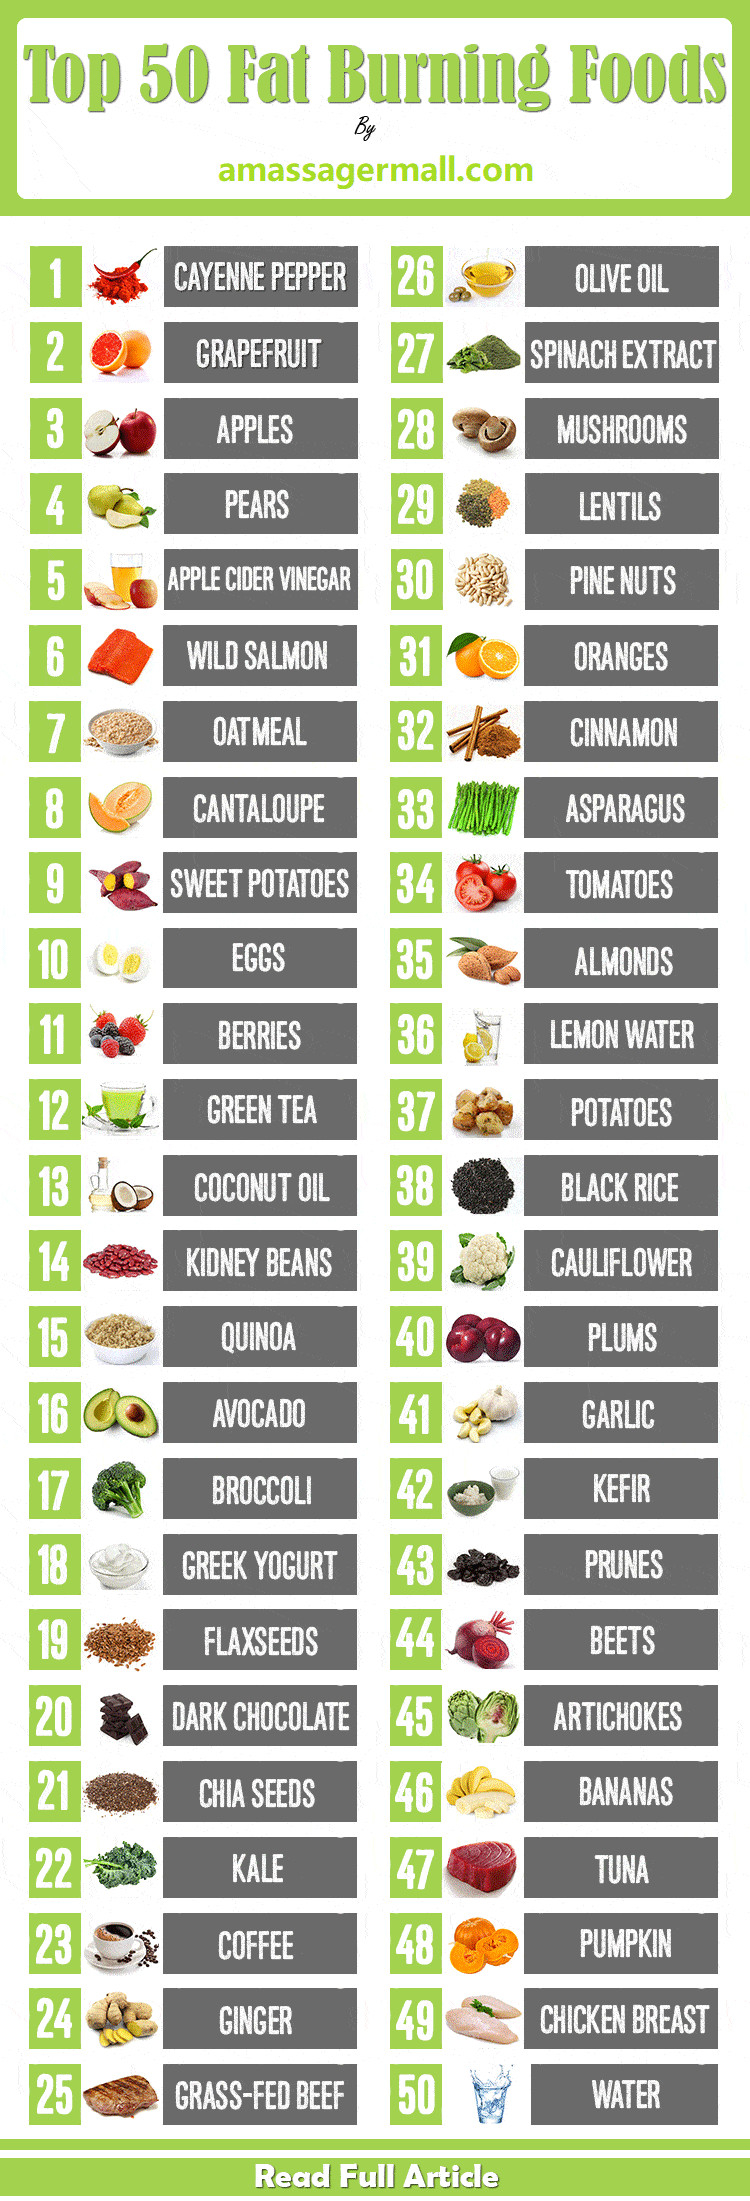 Quick Fat Burning Foods
 Top 50 fast and easy Fat Burning Foods Weight Loss t